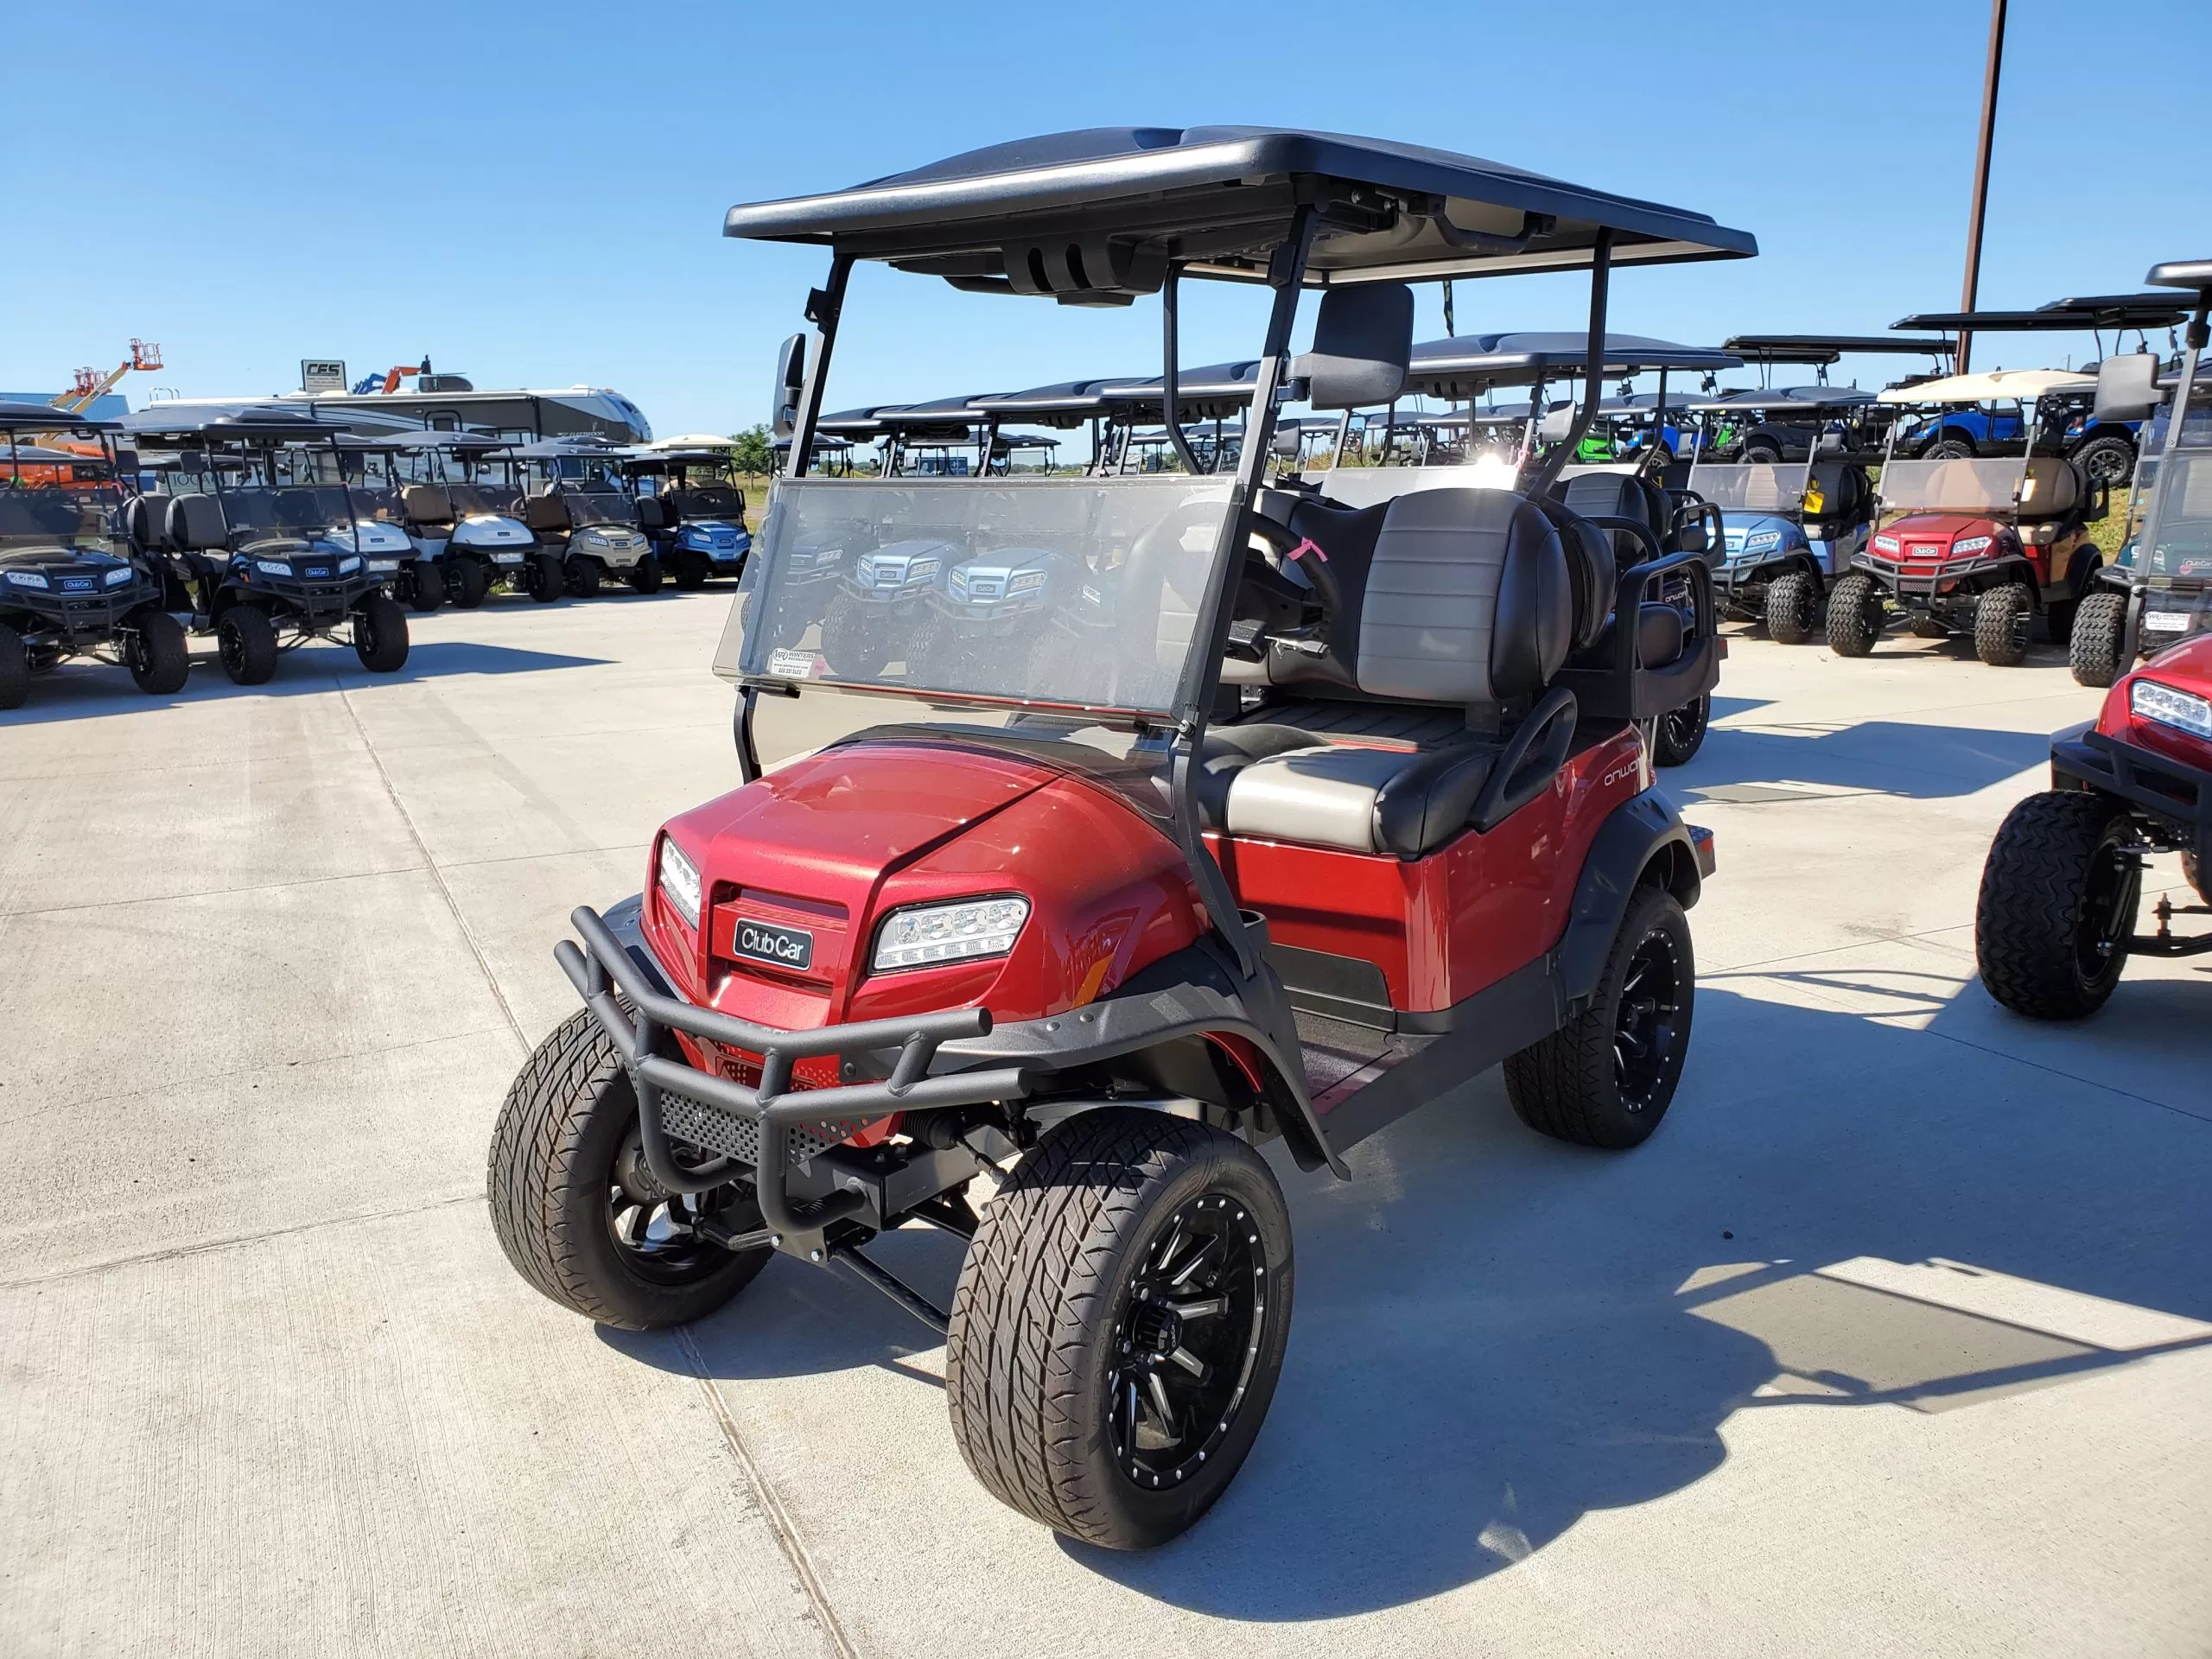 Club Car Golf Carts for Sale Right Now